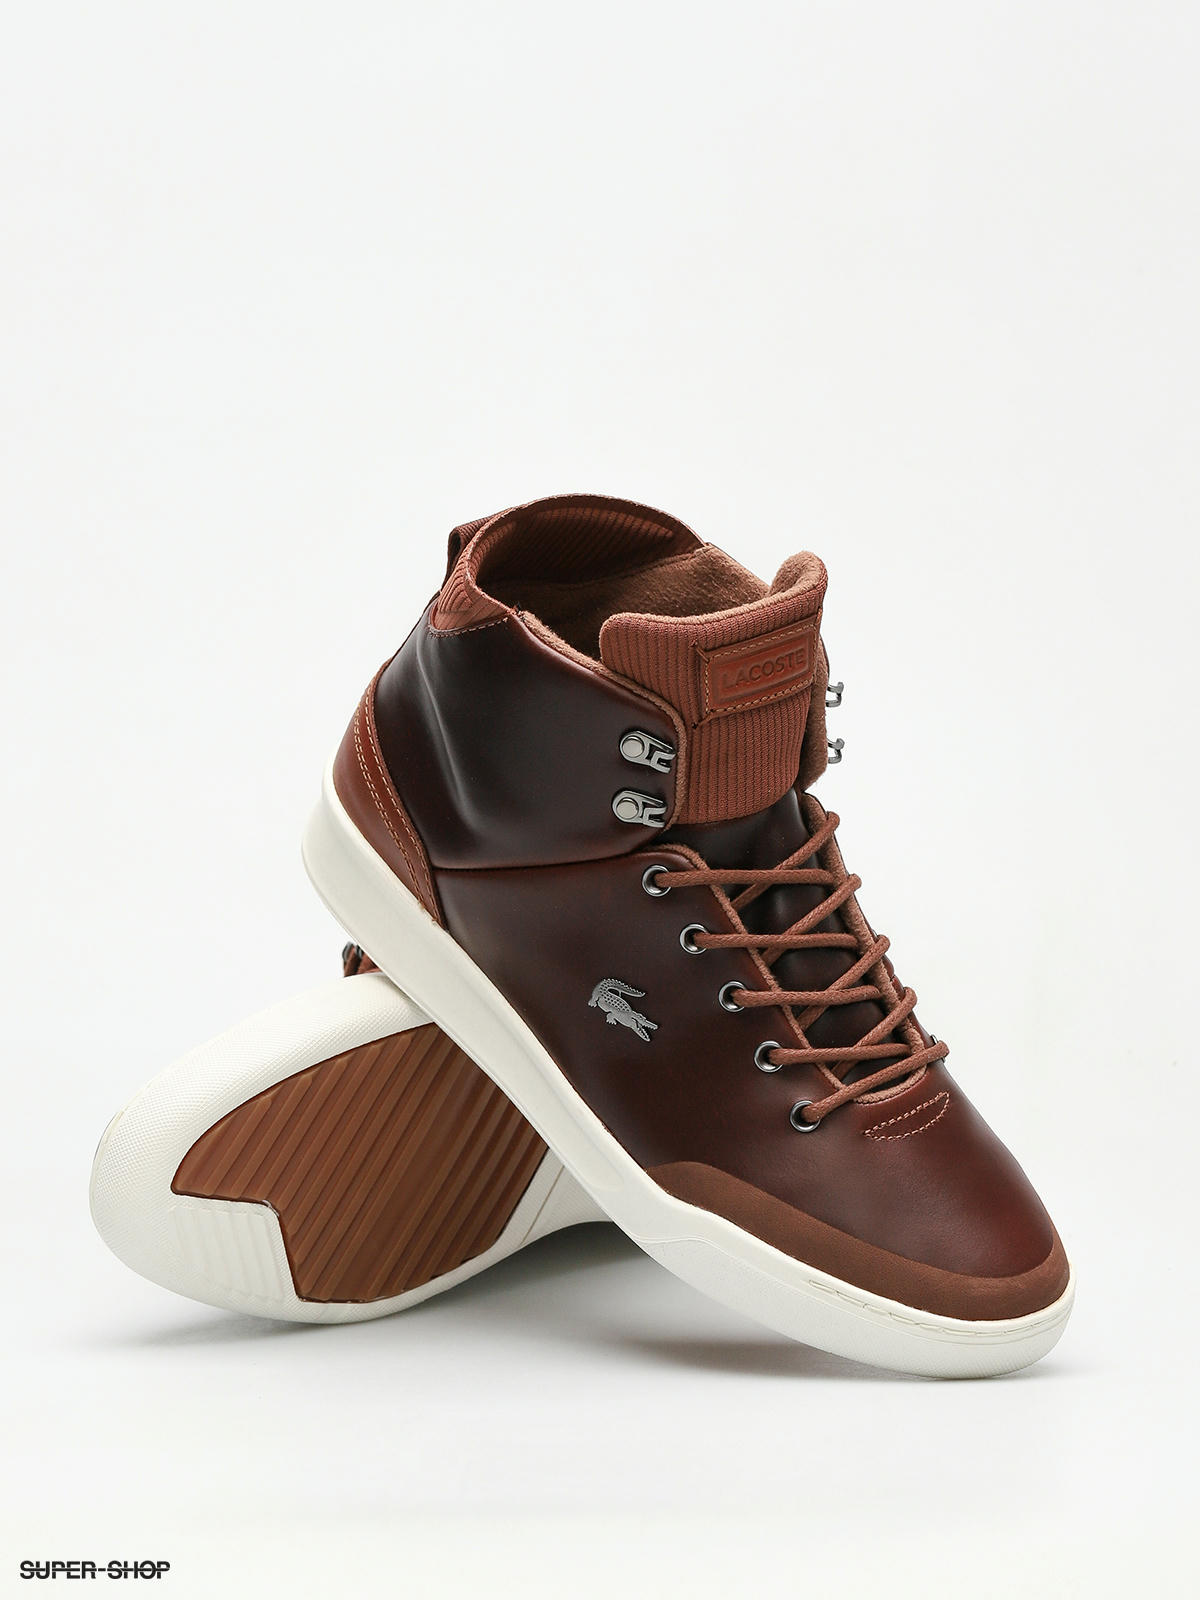 Lacoste Shoes Classic 318 1 (dark tan/brown)